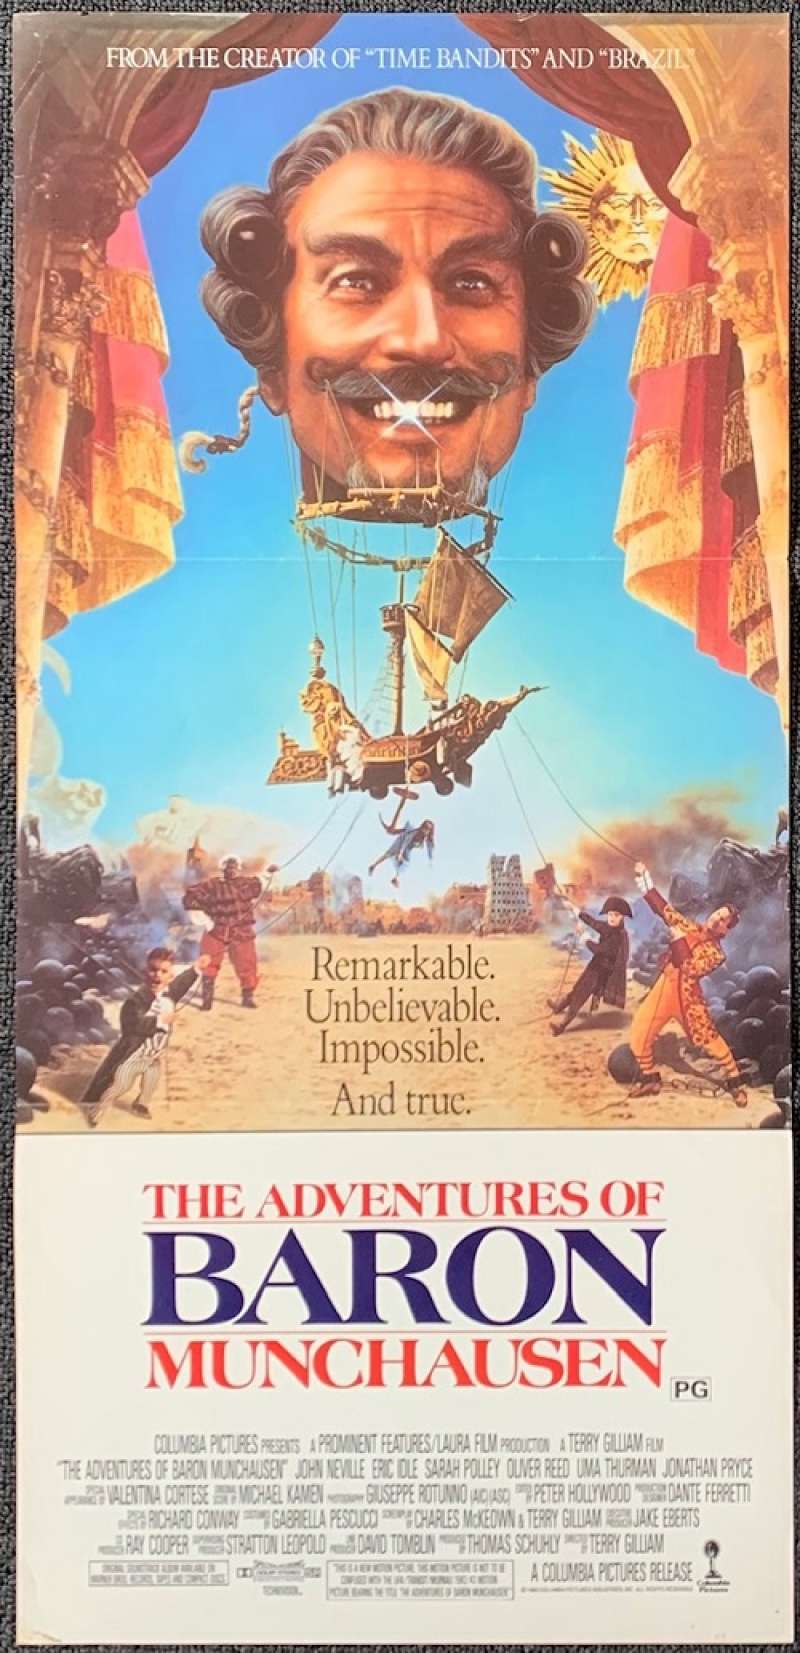 Buy Time Bandits-original Vintage Movie Poster for Terry Gilliam's